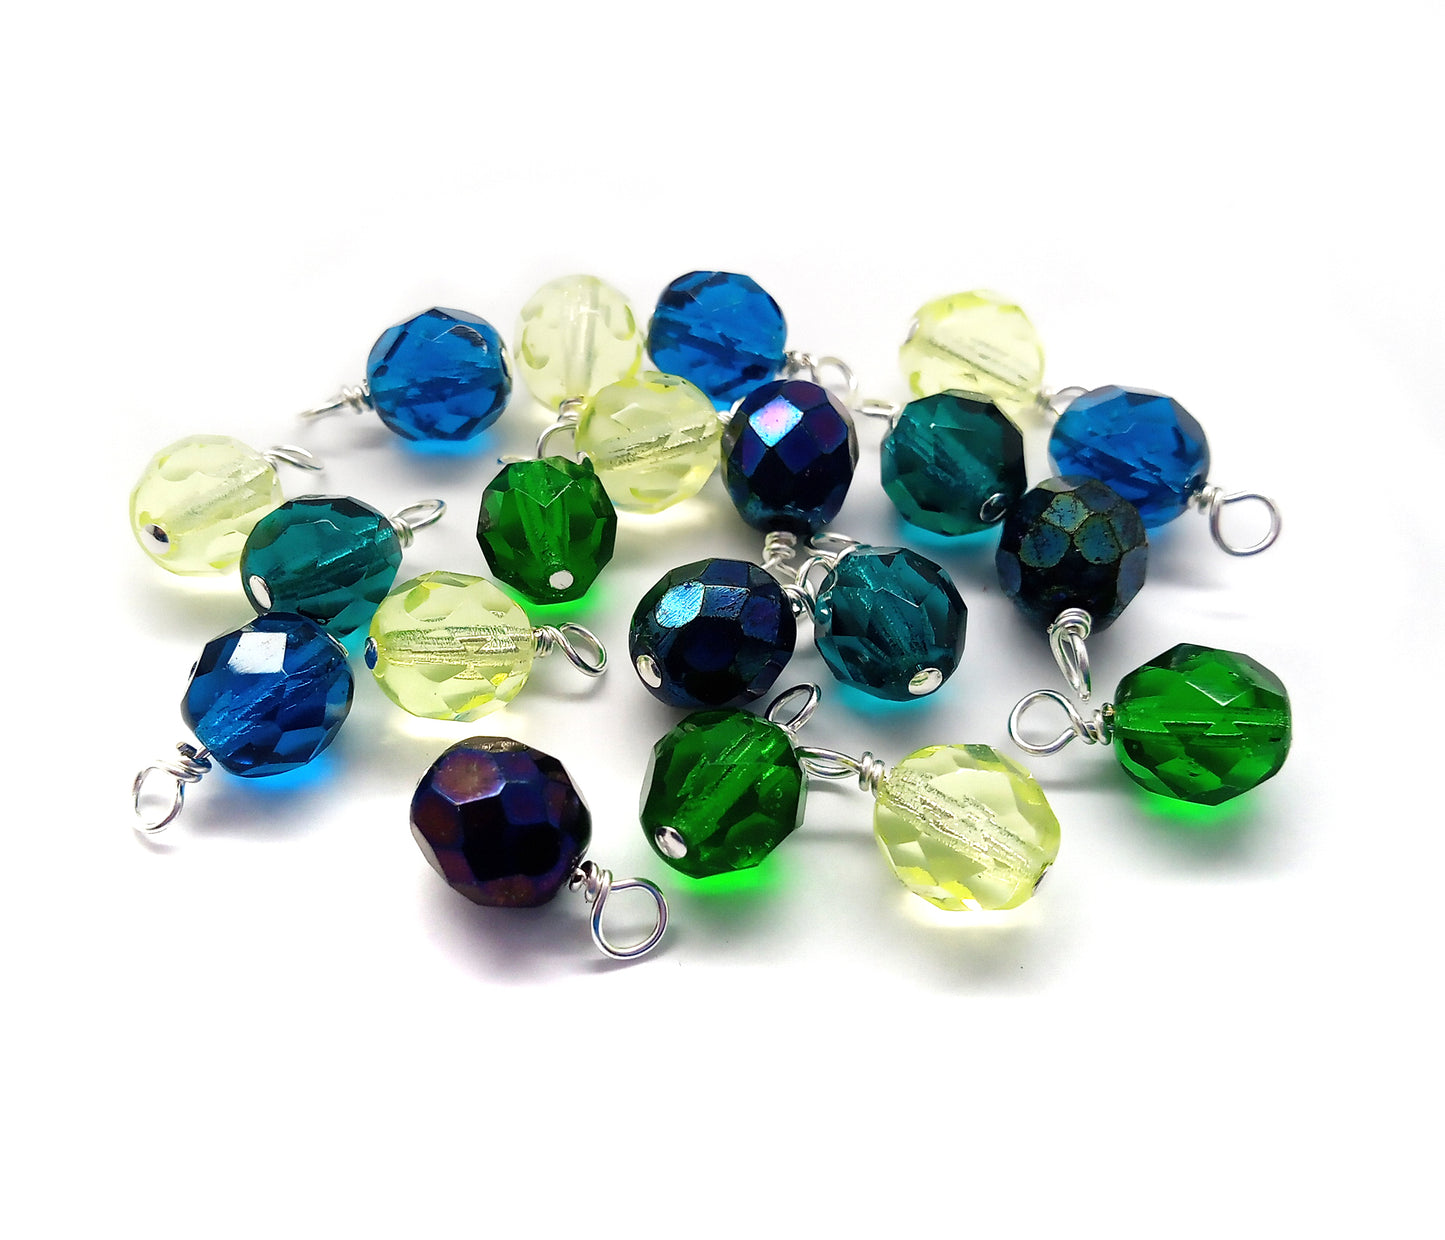 10 pc Colorful Dangles, 8mm Fire-Polished Bead Charms, Pacific Mix